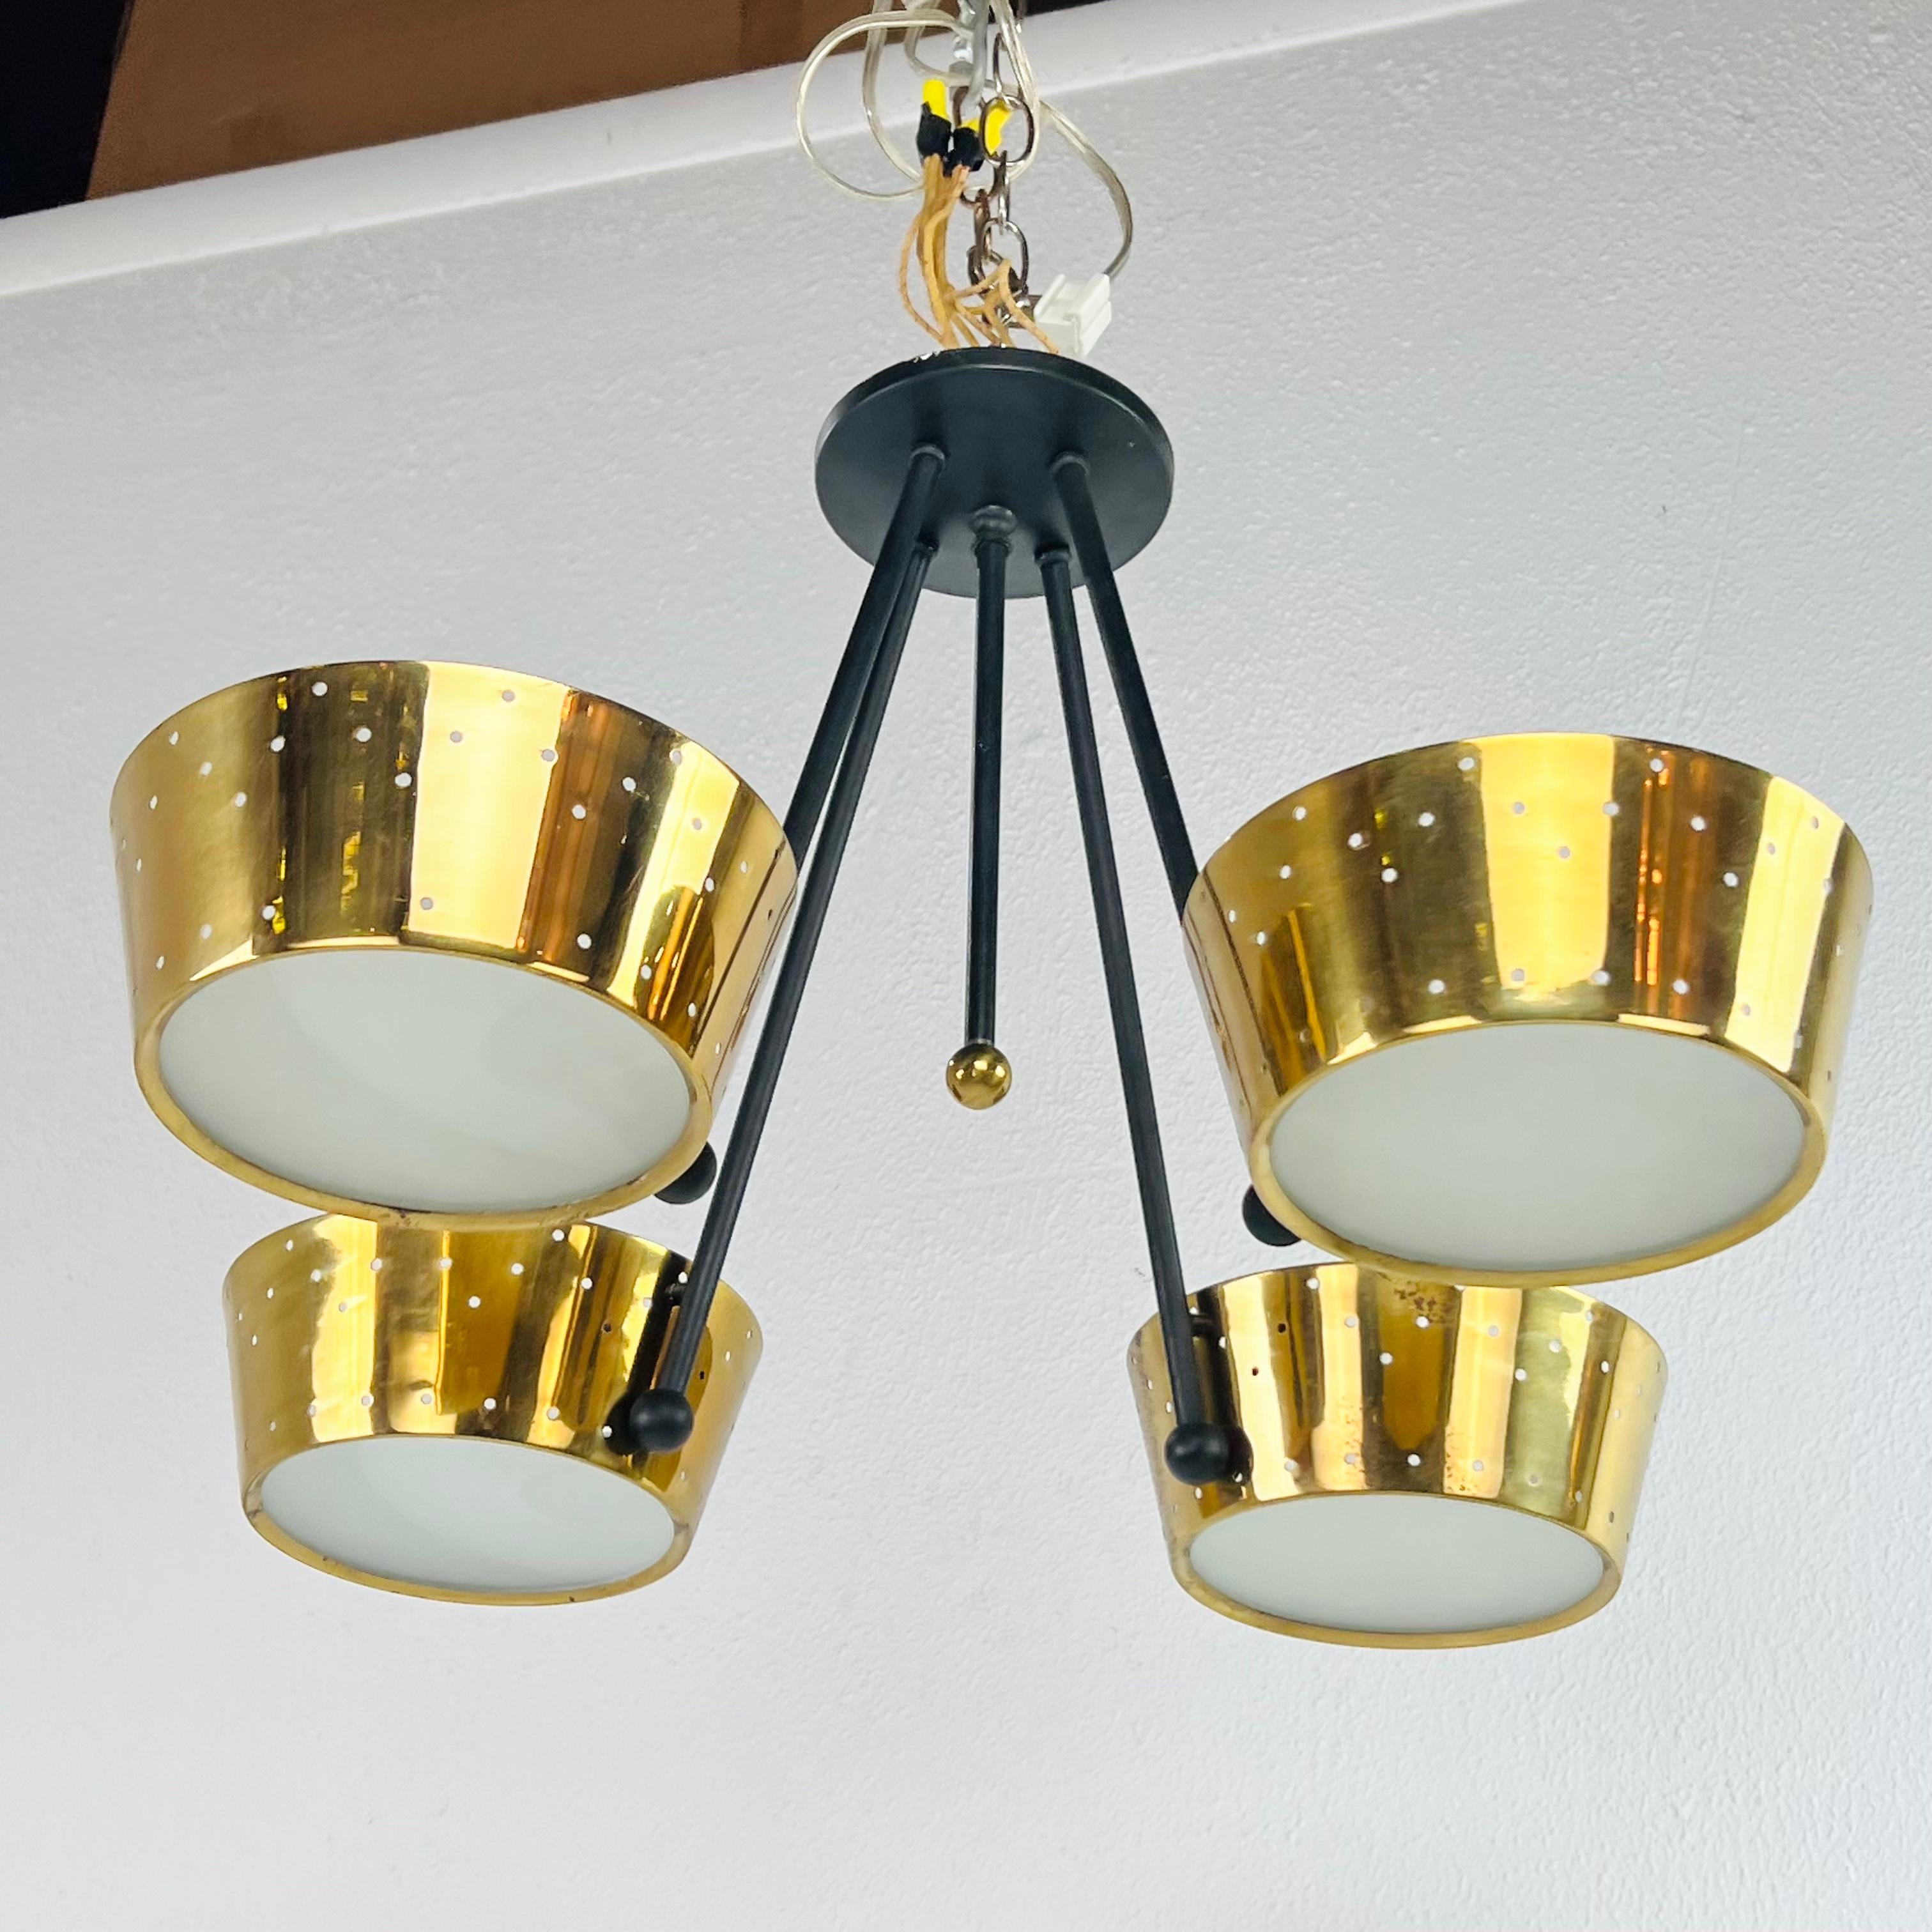 Suspension lamp attributed to Lightolier, in the style of Gerald Thurston, with four polished and perforated brass reflectors, USA 1950. International Brotherhood of Electrical Workers 